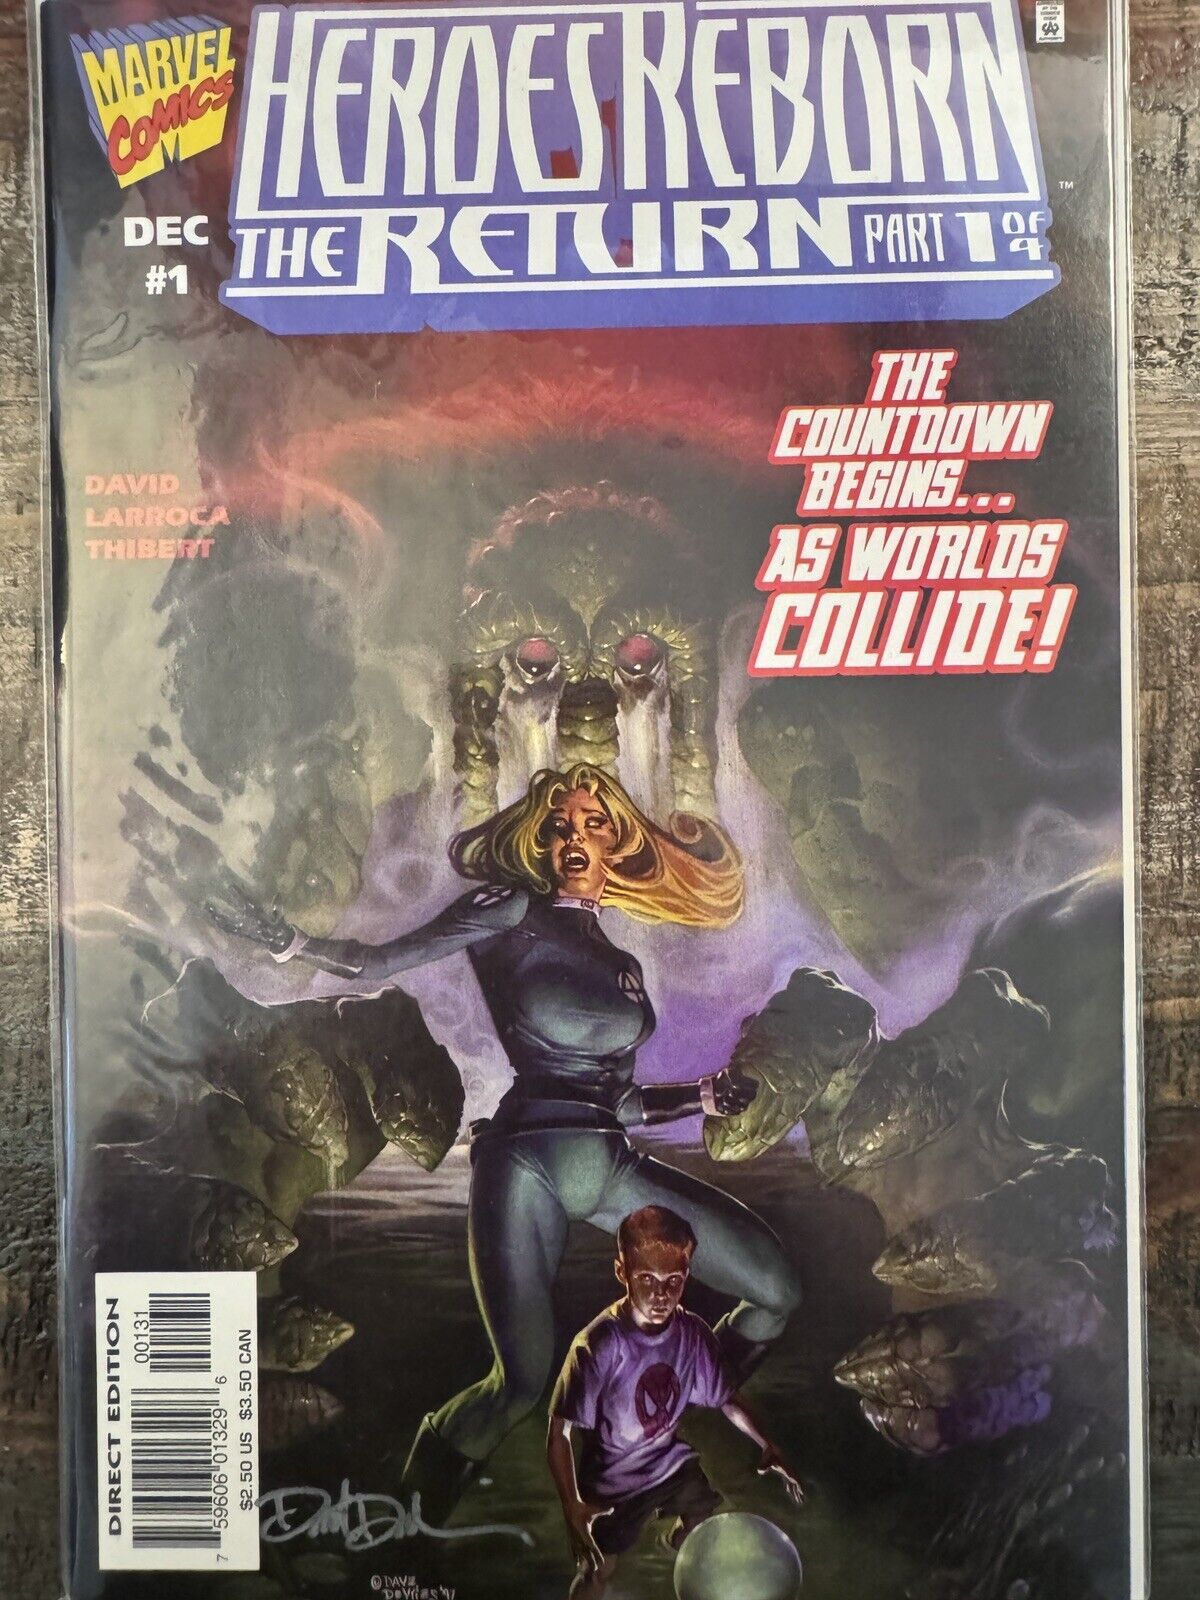 Heroes Reborn The Return #1 Comic Zone Exclusive variant signed 1426/2000